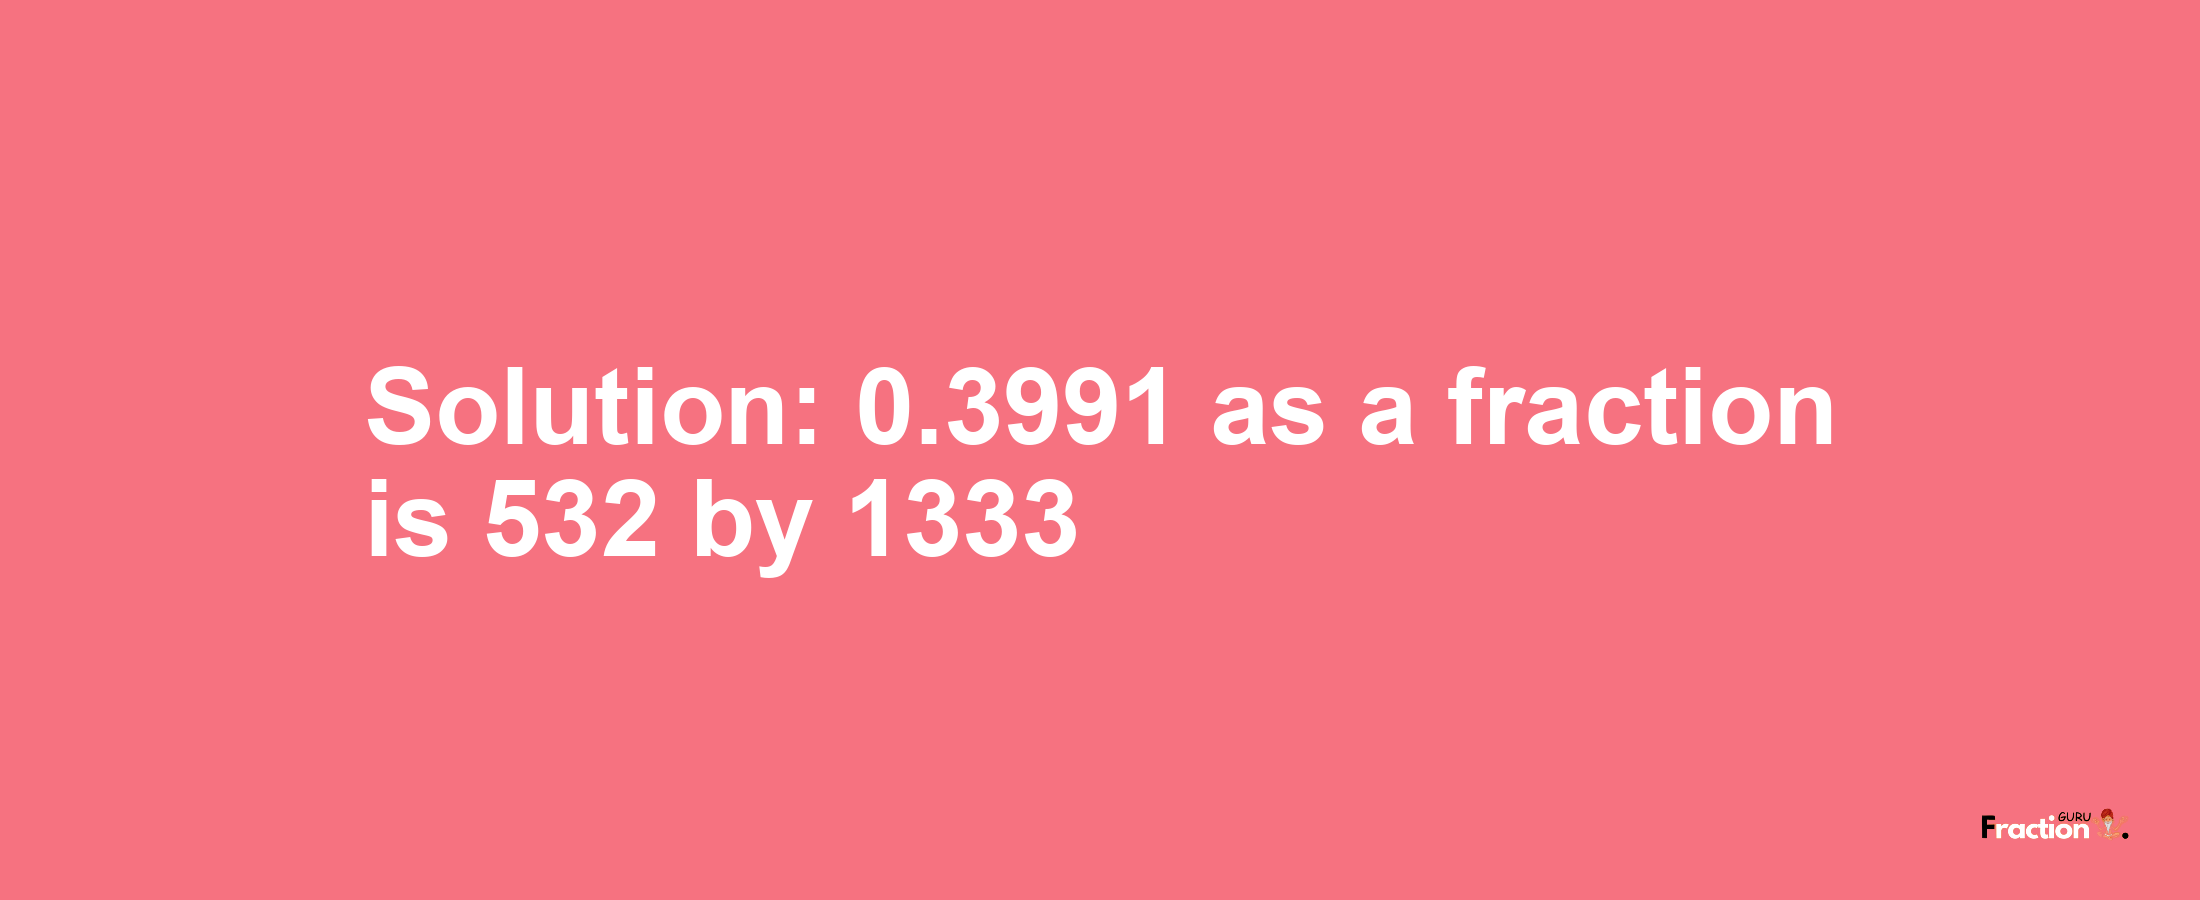 Solution:0.3991 as a fraction is 532/1333